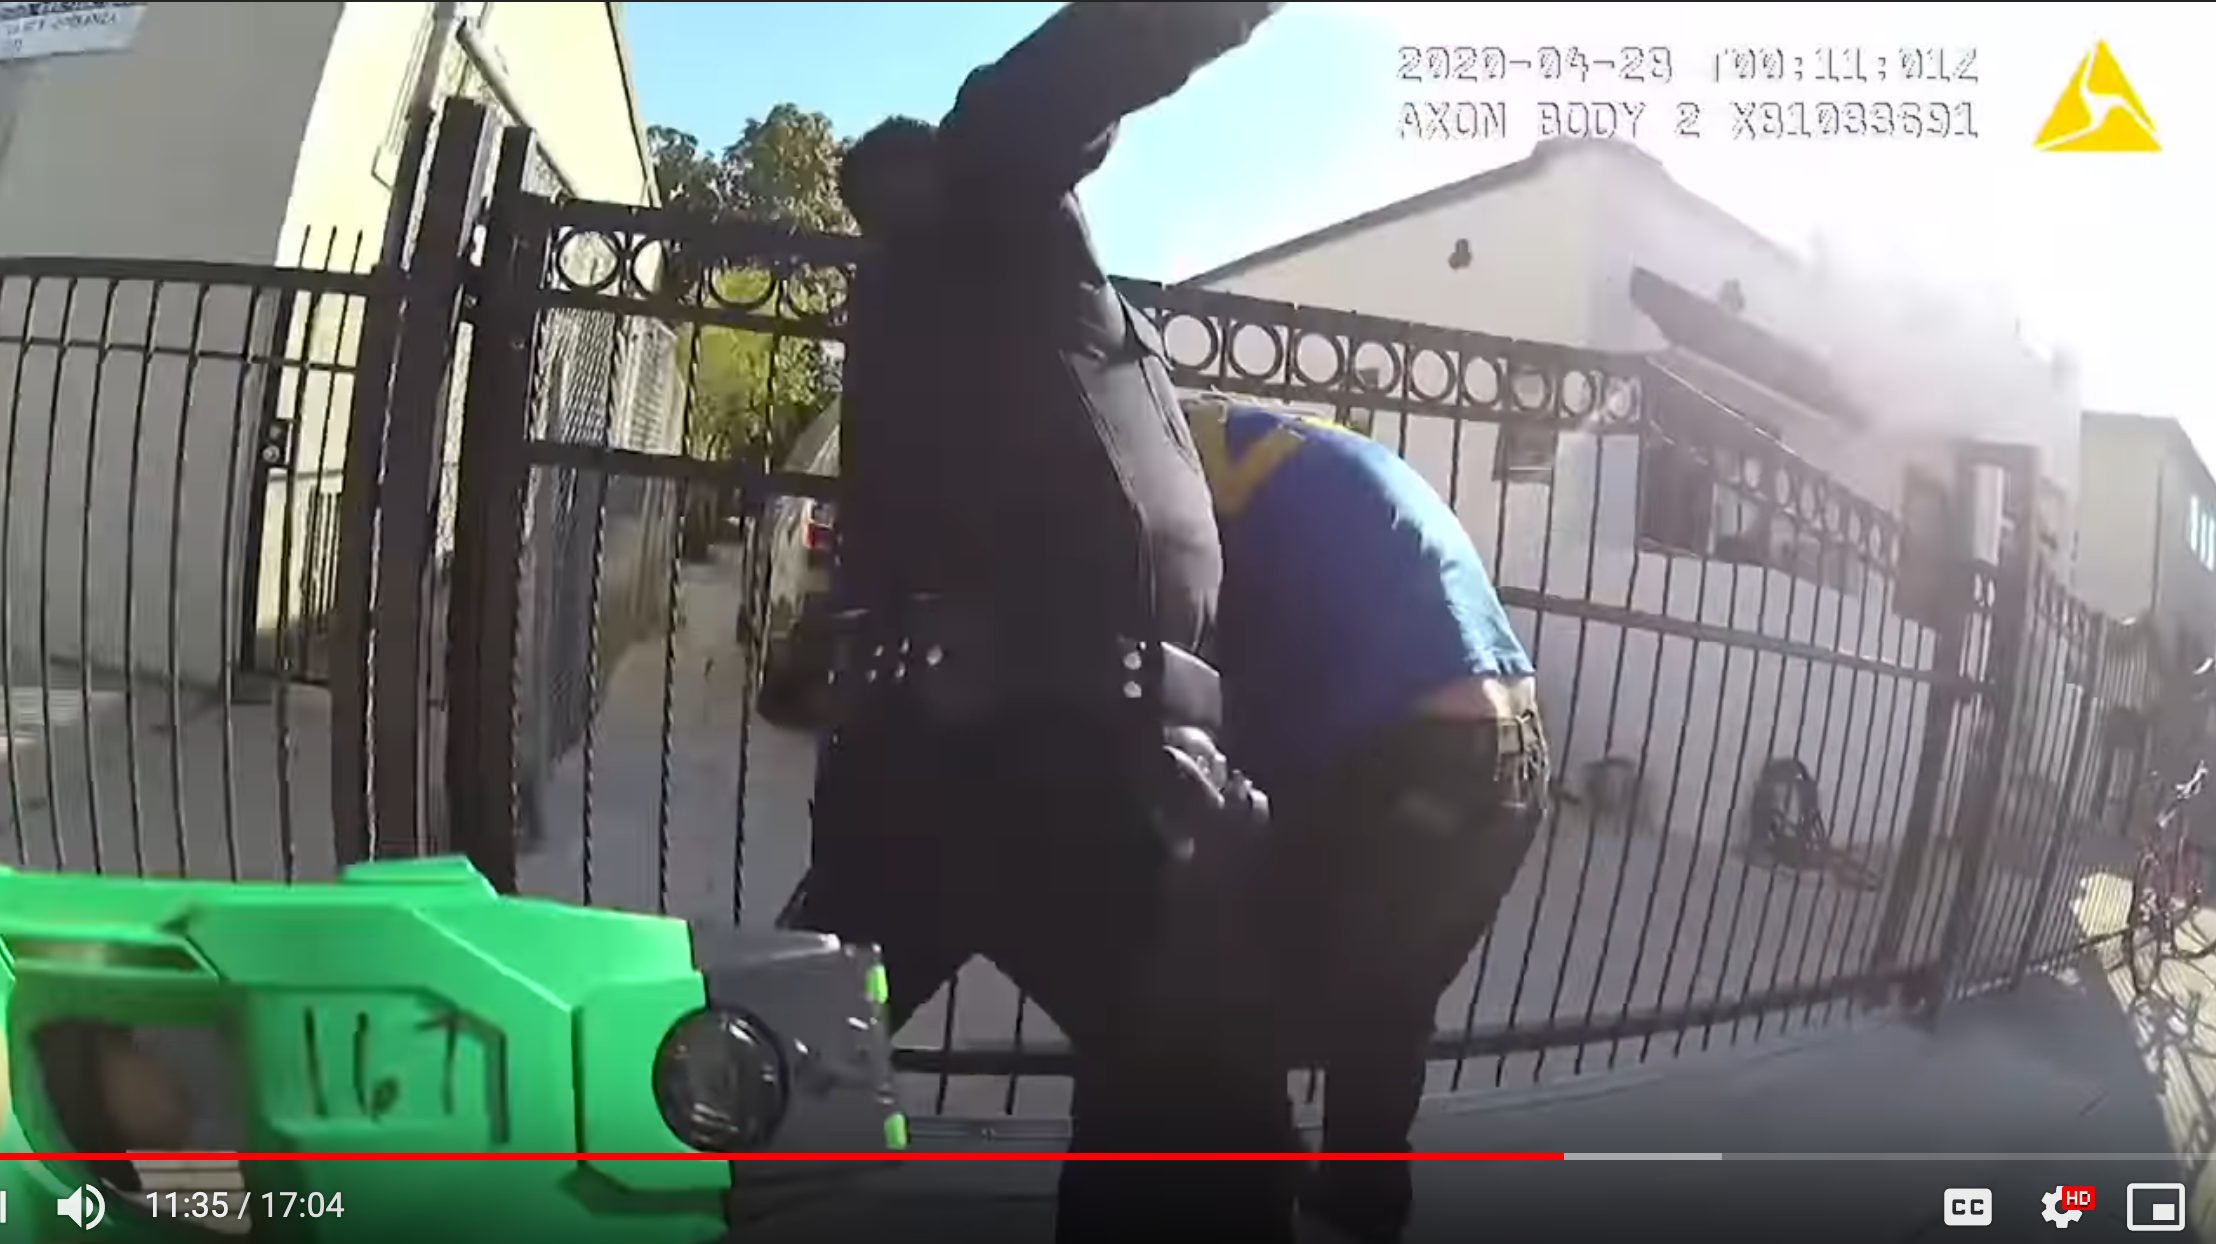 Officer Frank Hernández rains blows down on Richard Castillo while his partner stands by with her taser ready in Boyle Heights on April 27. Image captured from LAPD body cam footage.